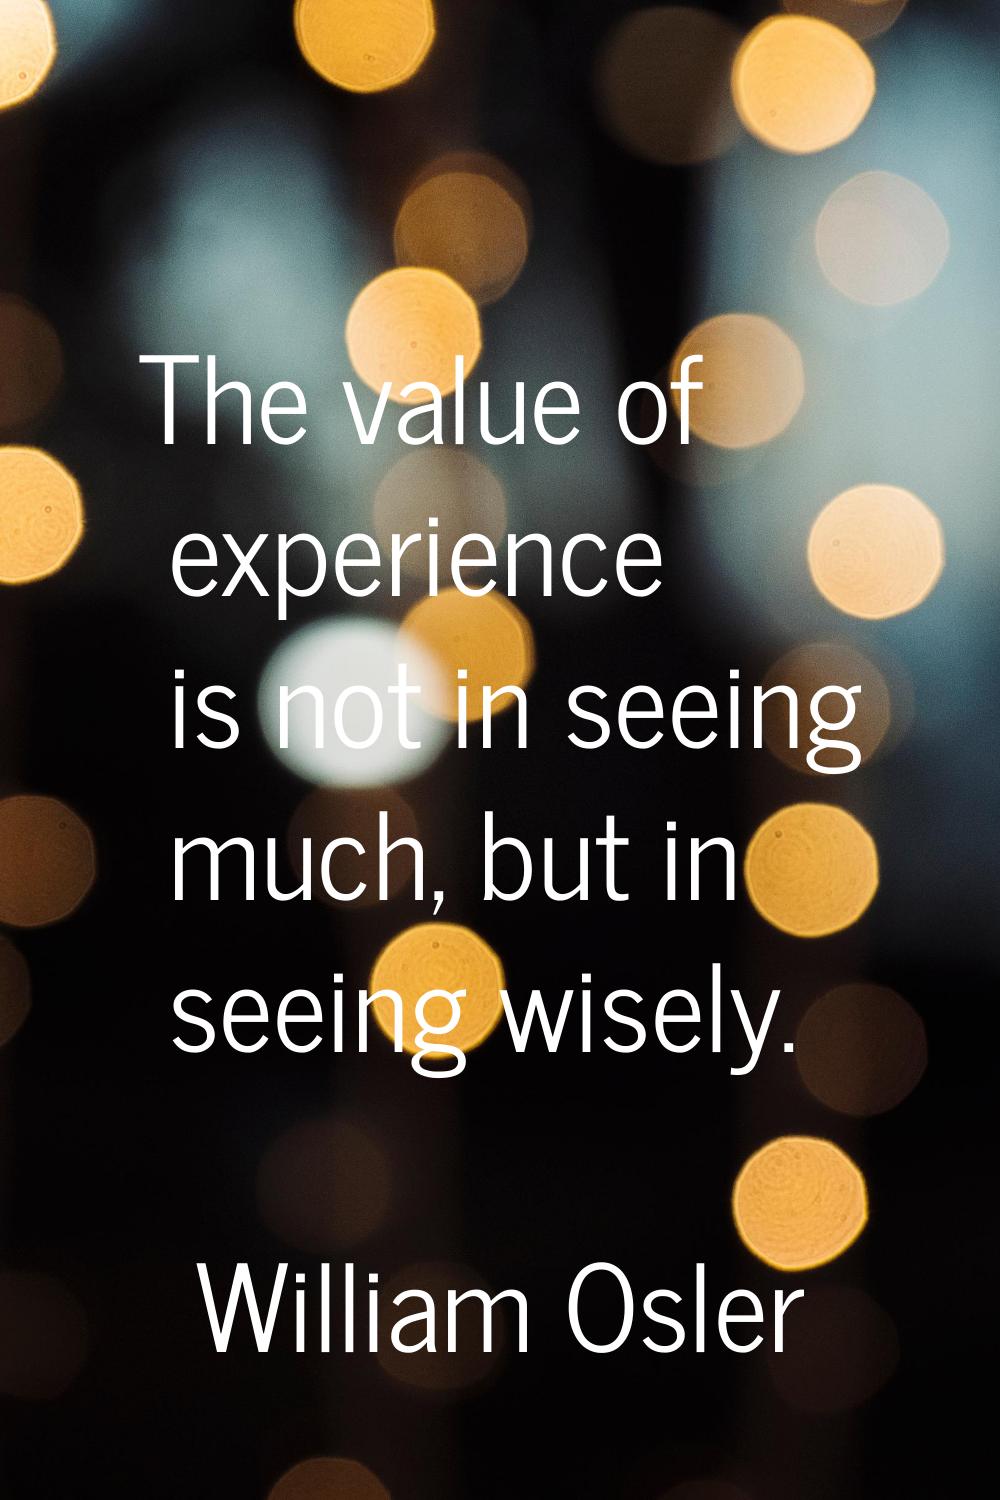 The value of experience is not in seeing much, but in seeing wisely.